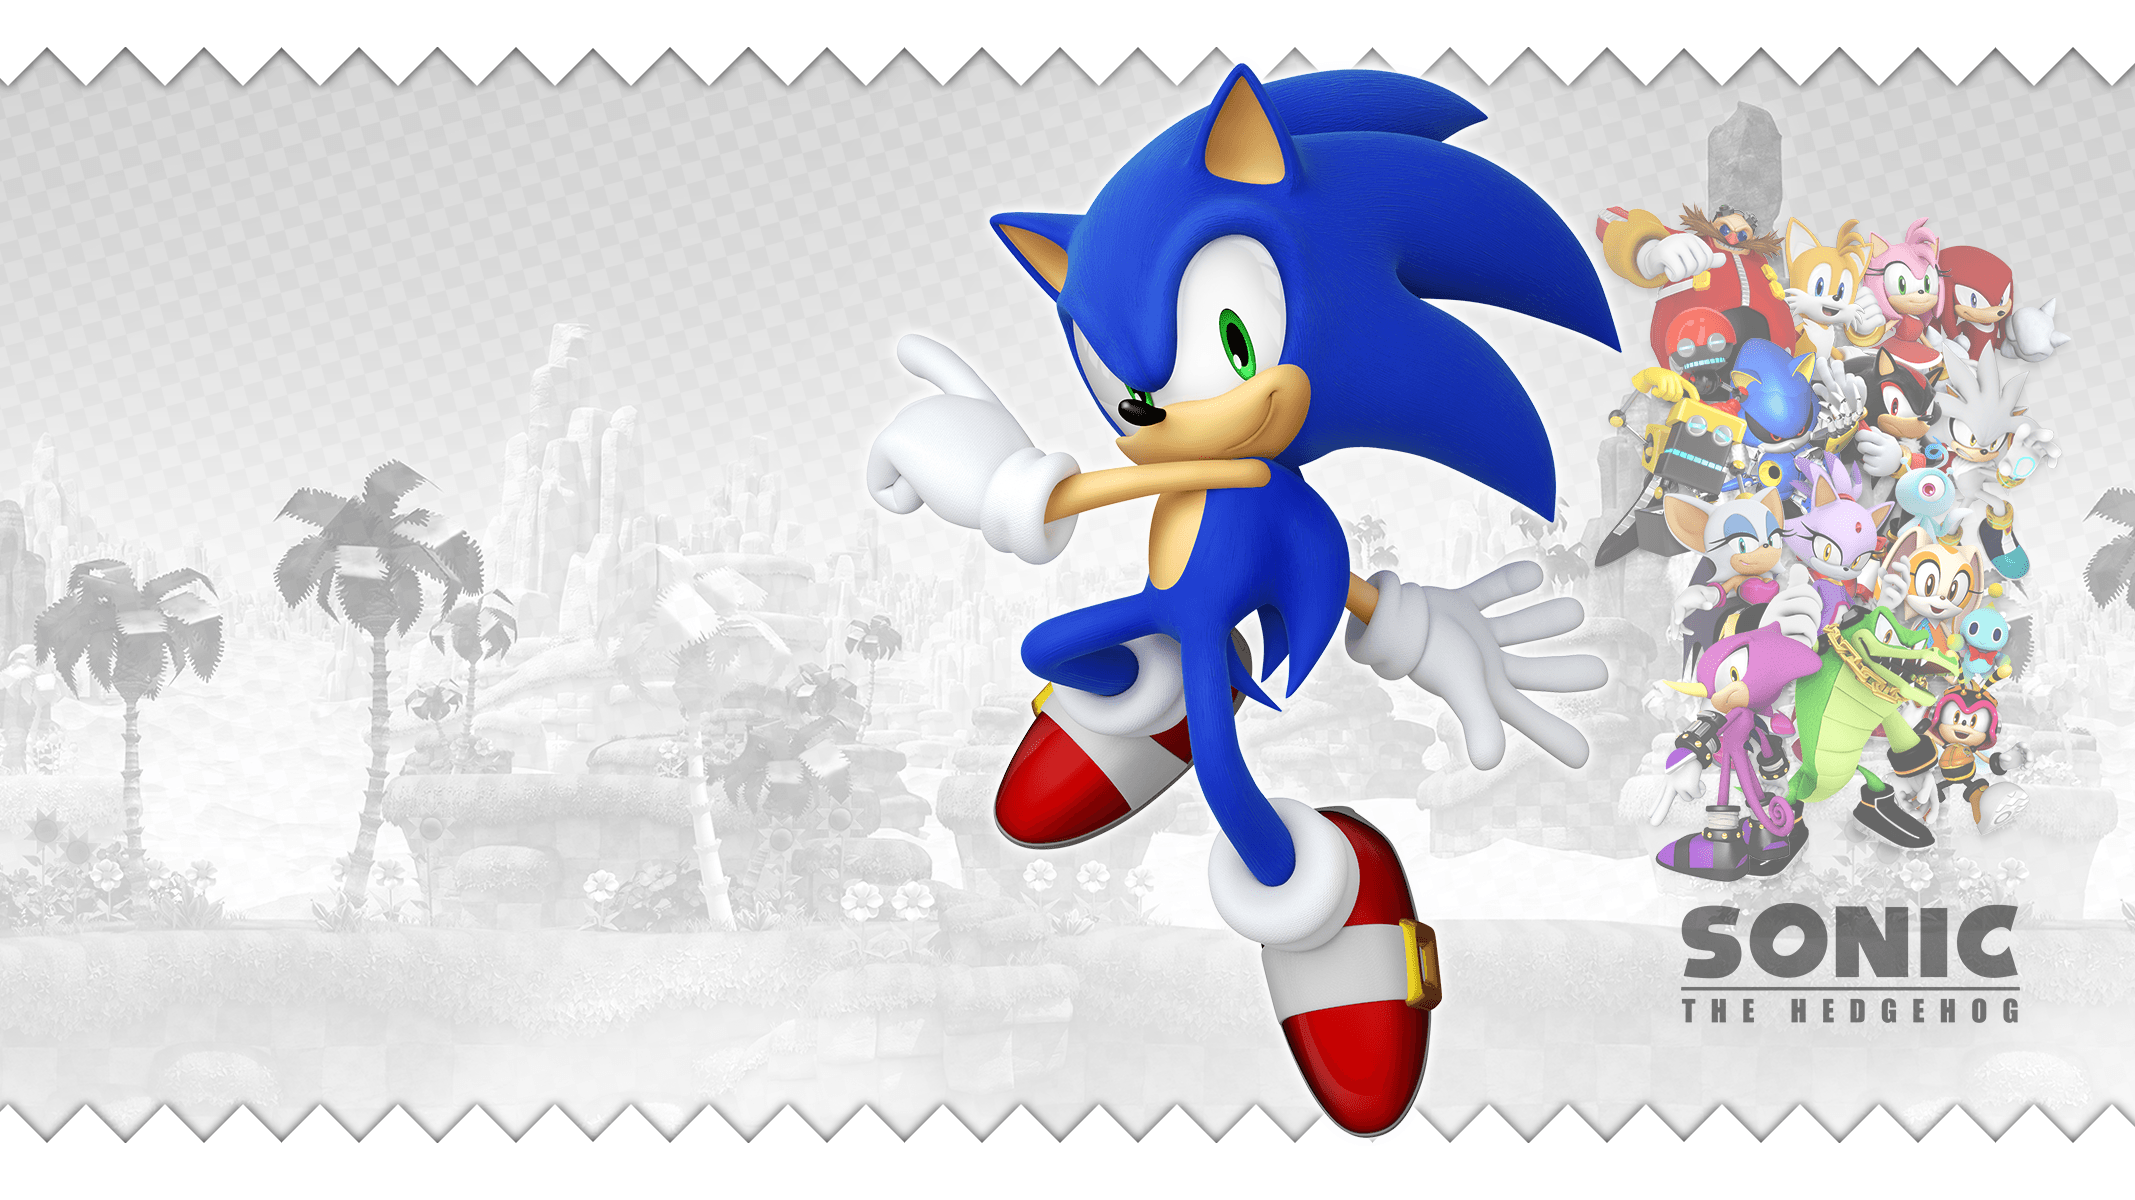 Sonic The Hedgehog Wallpapers 2017